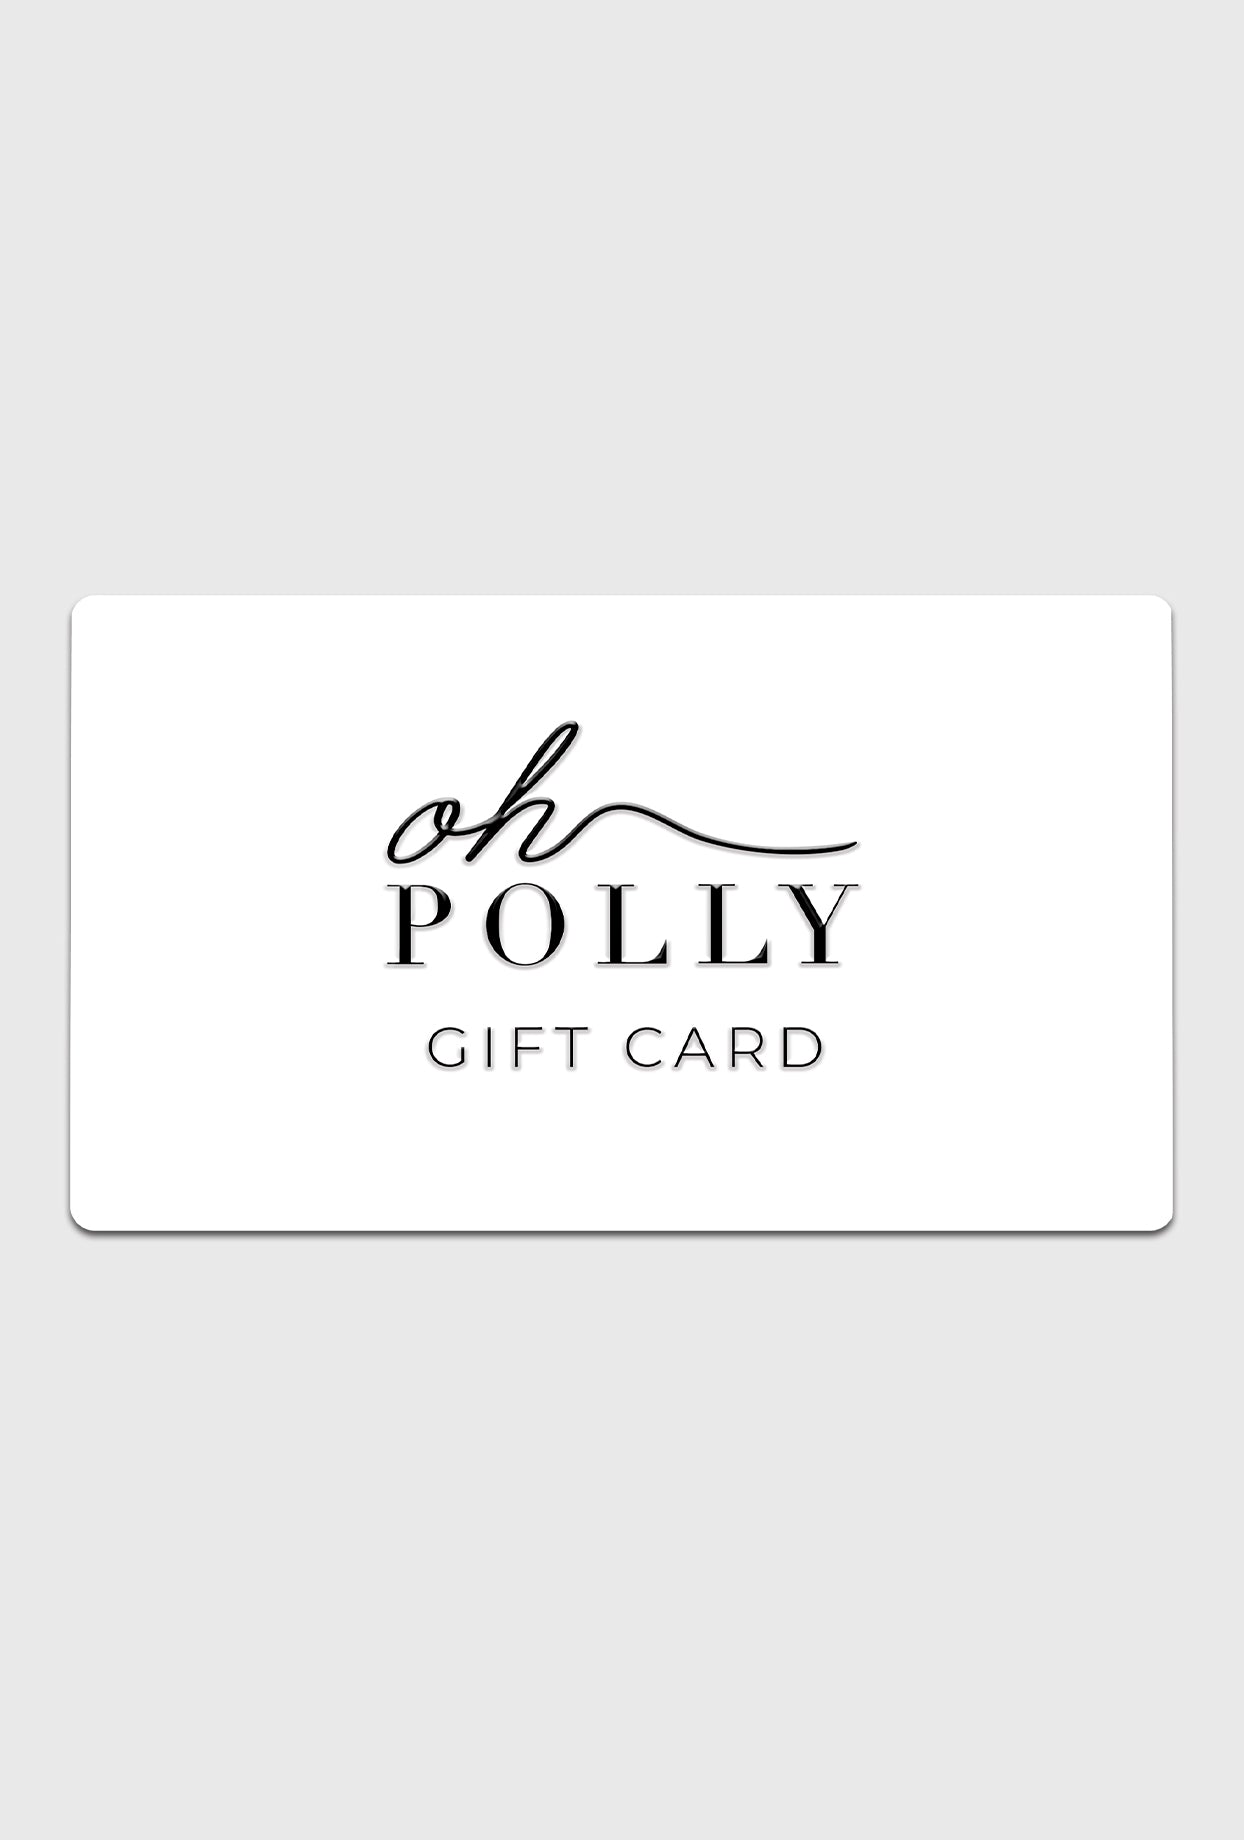 Simply Soles Women's Gift Card in $25.00